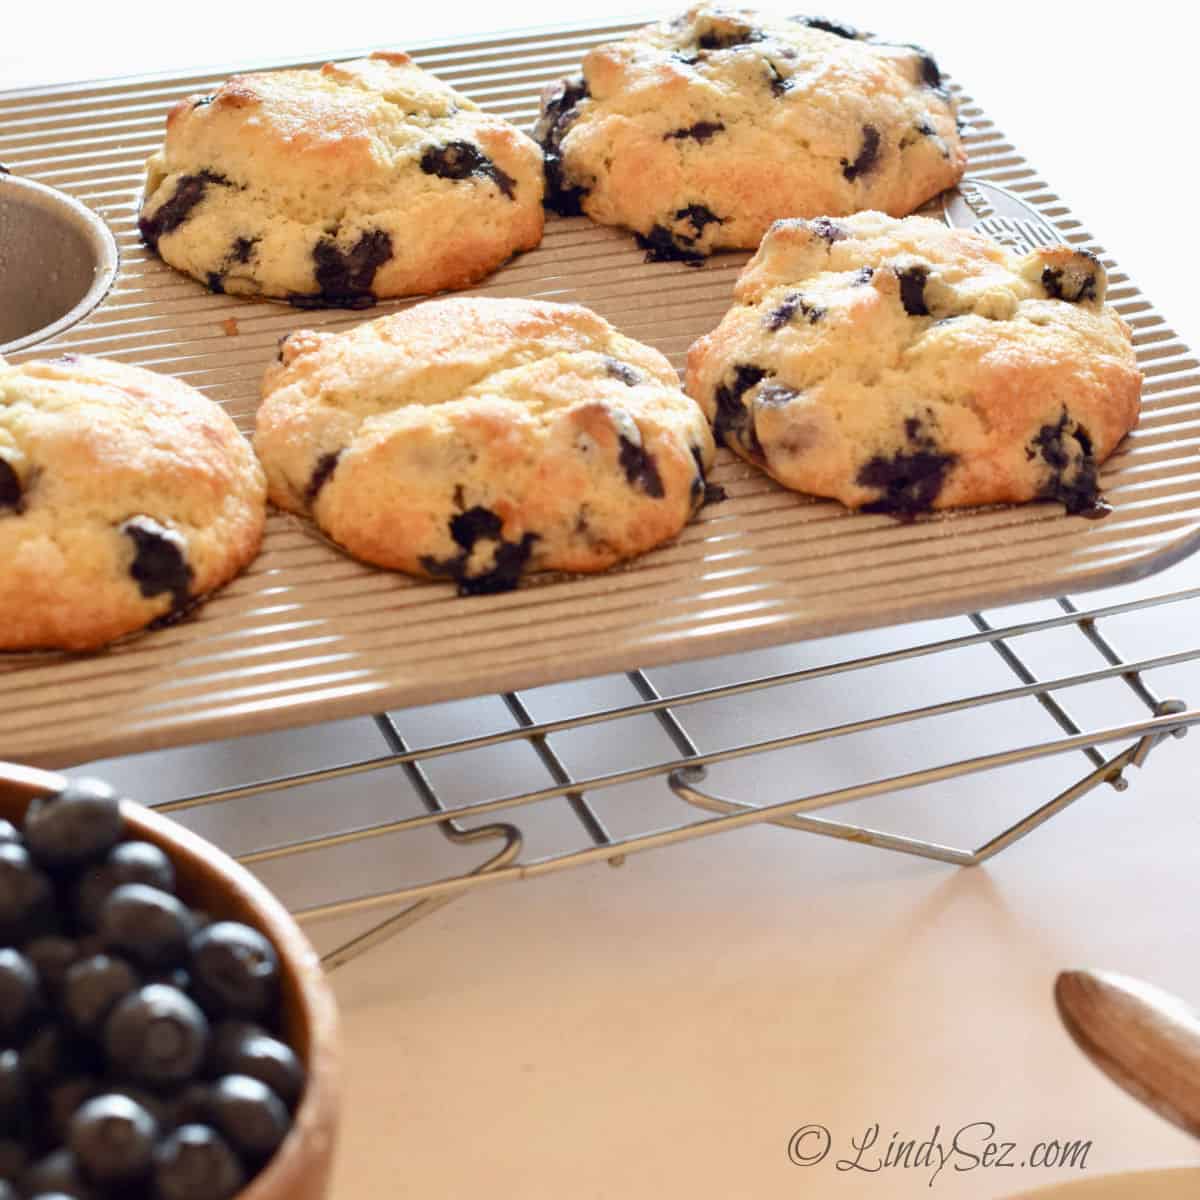 A tray of finished blueberry muffins.